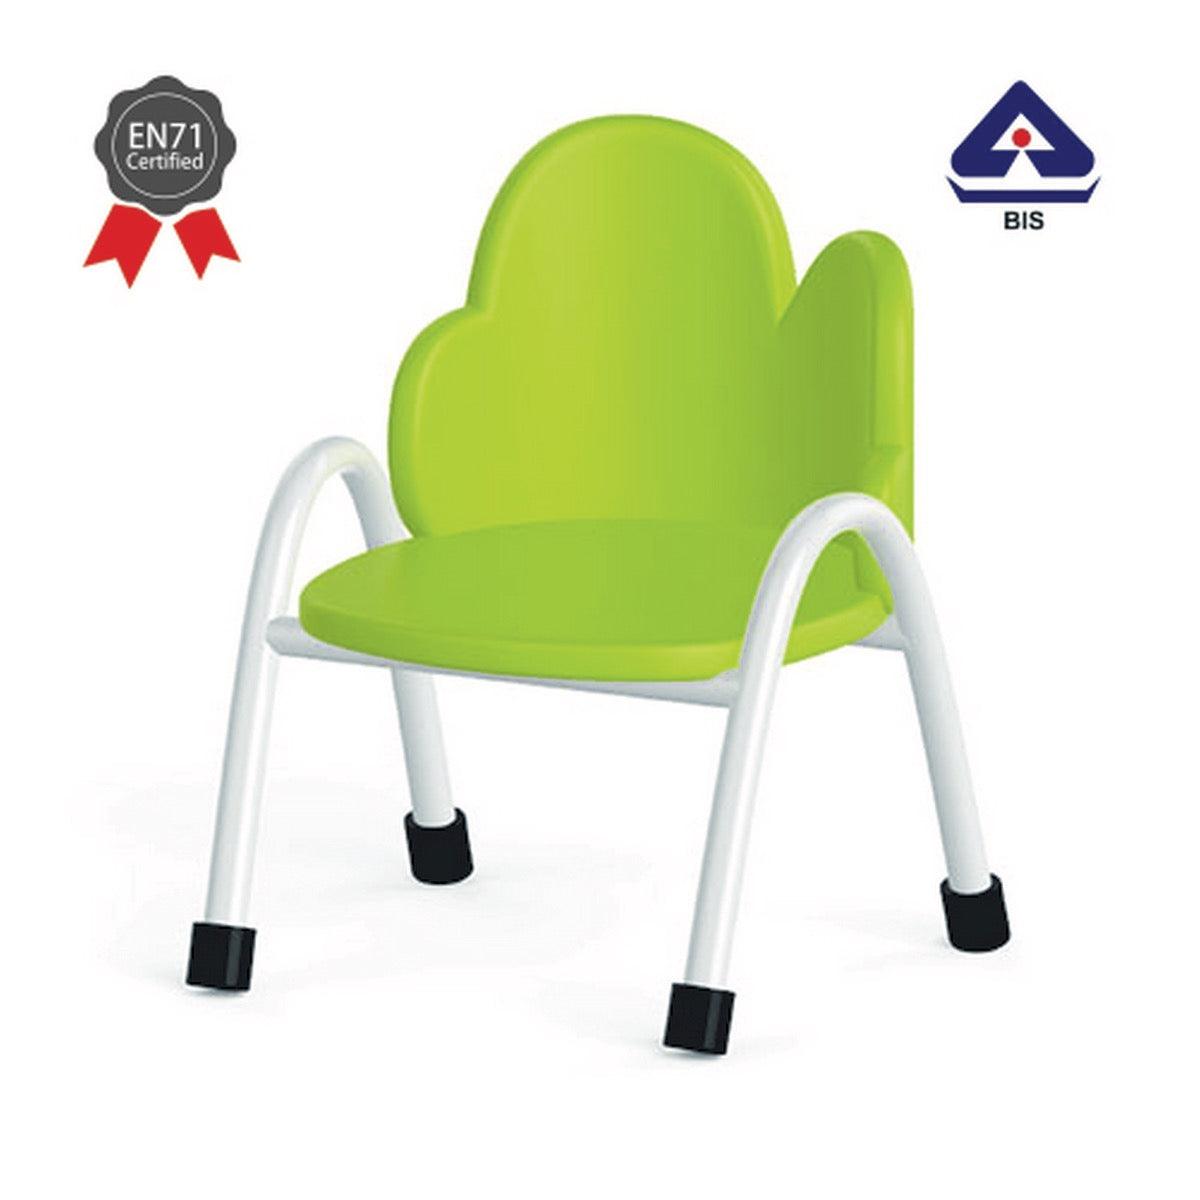 Ok Play Cloud Chair, Study Chair, Sturdy And Durable Chair, Plastic Chair, Perfect For Home, Creches And School, Green, 5 to 10 Years, Height 12 Inches